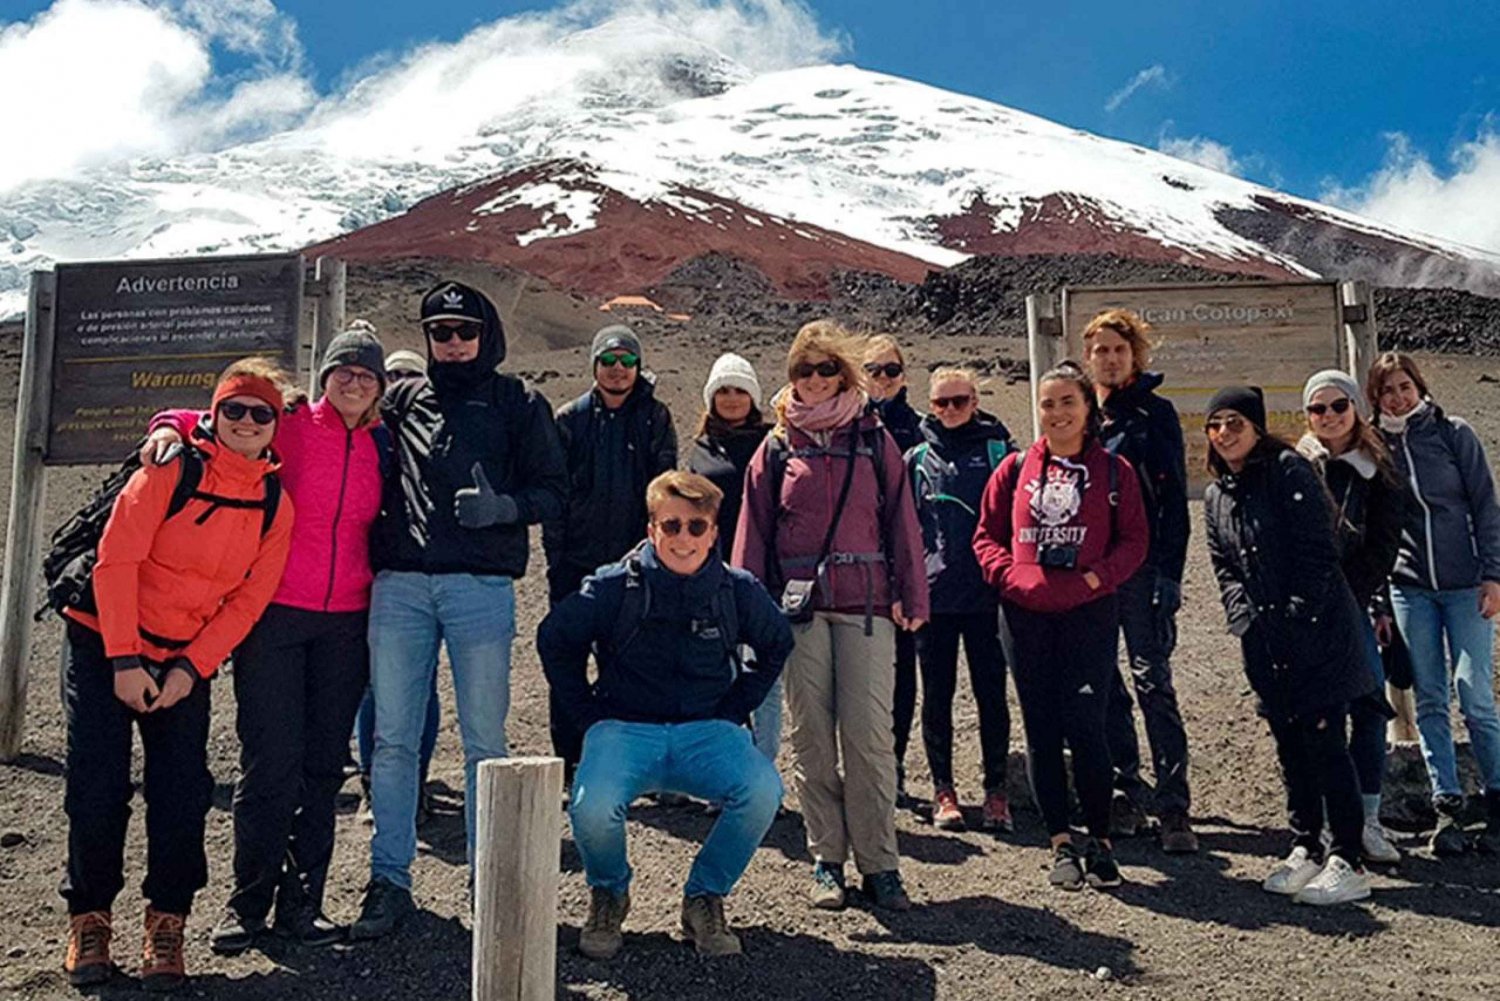 From Quito:Cotopaxi and Quilotoa Tour-Includes Lunch One Day